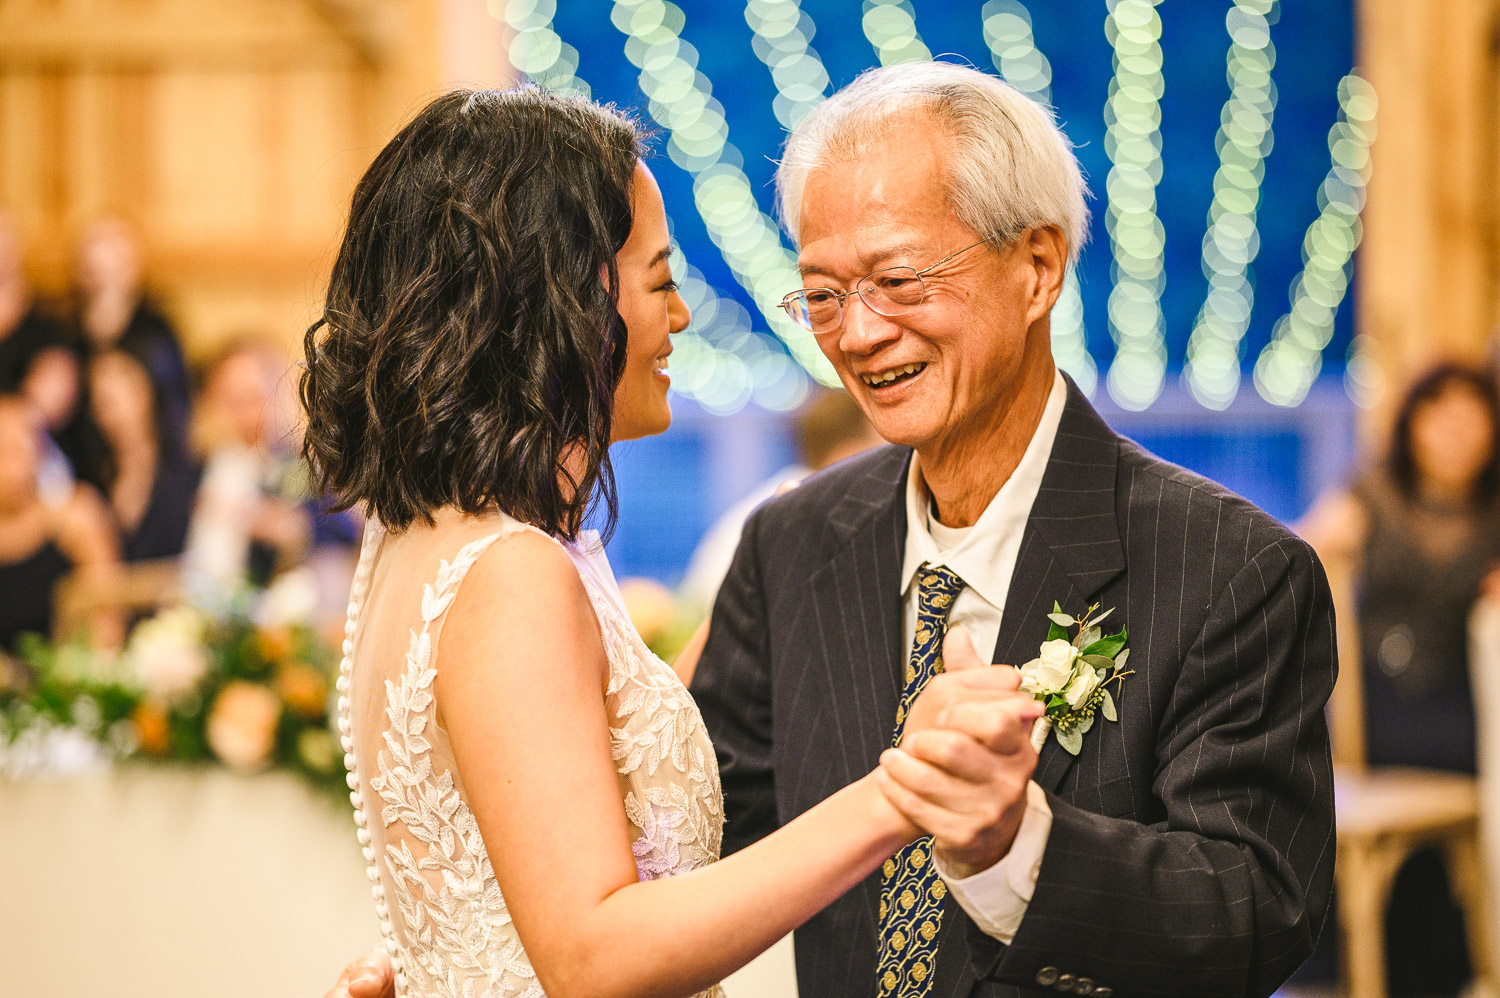 Bride dancing with her father during reception